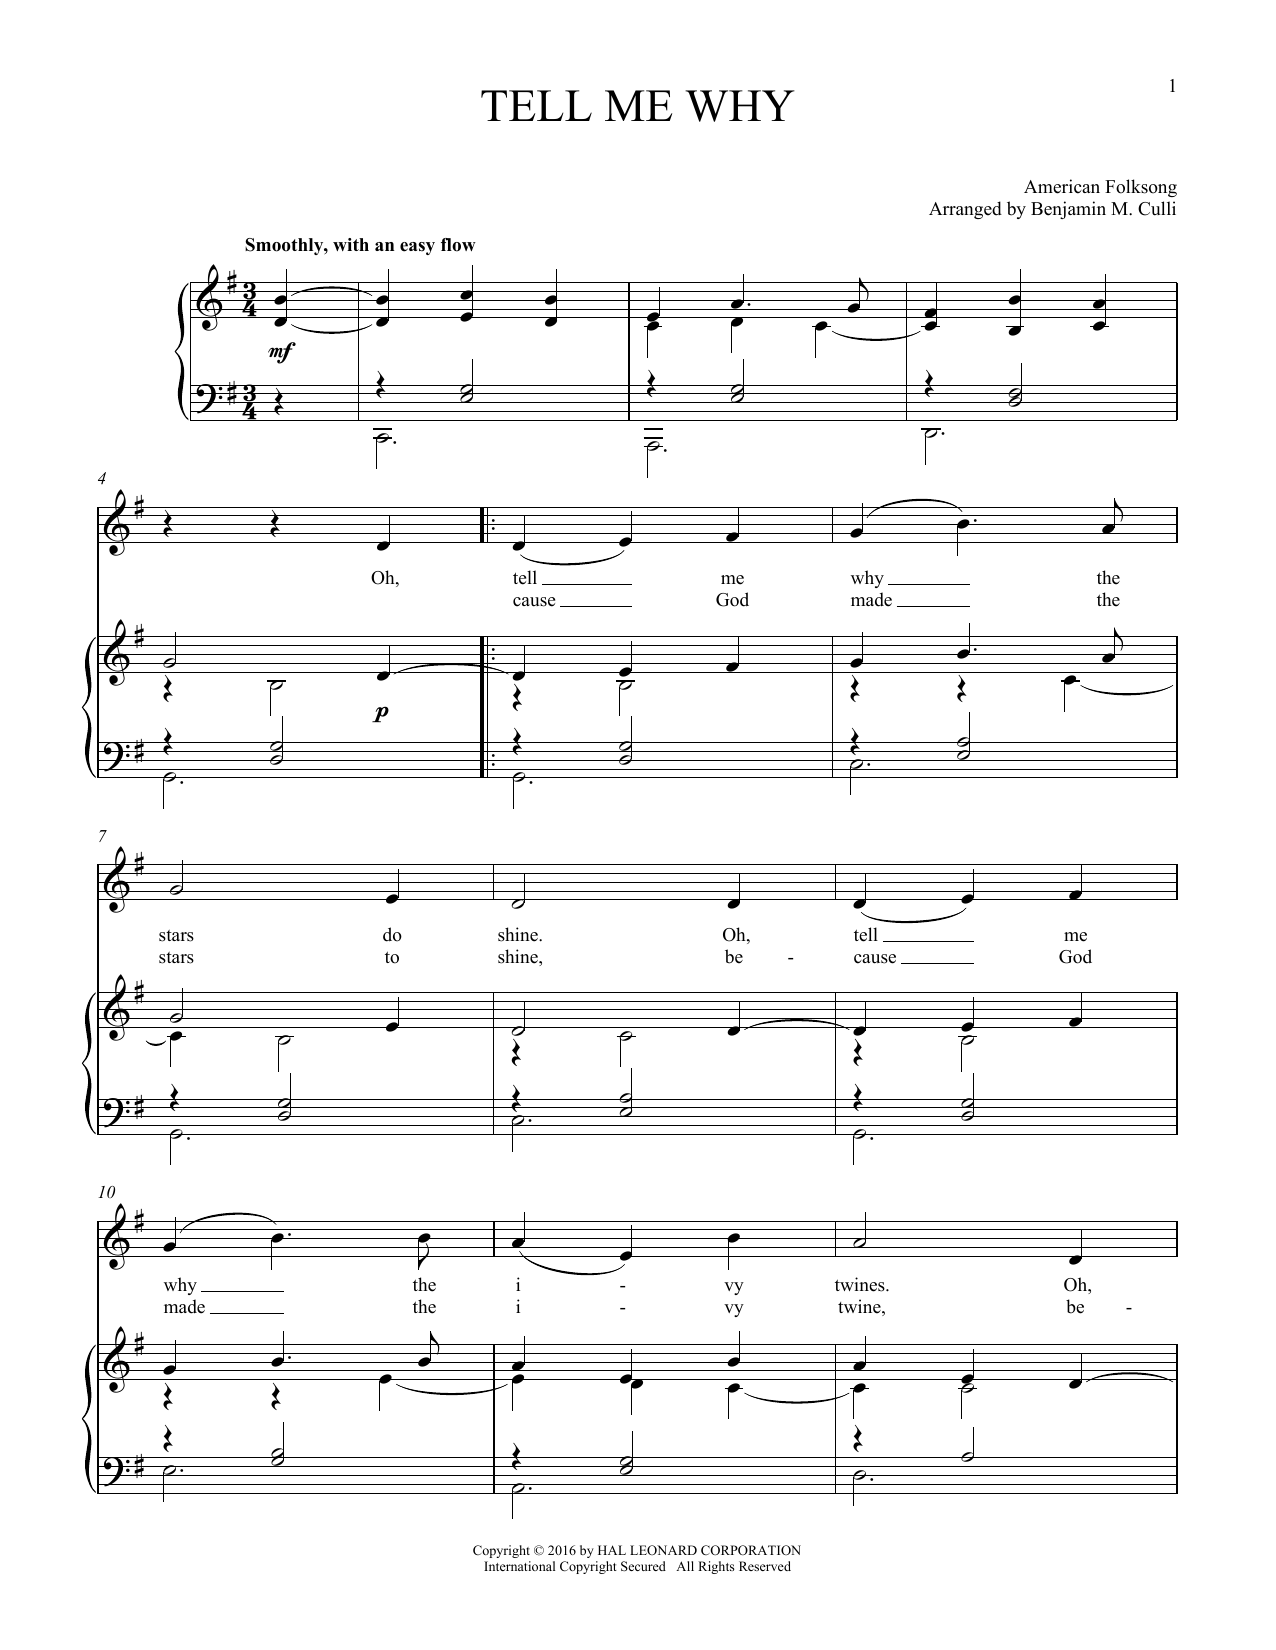 Download American Folksong Tell Me Why Sheet Music